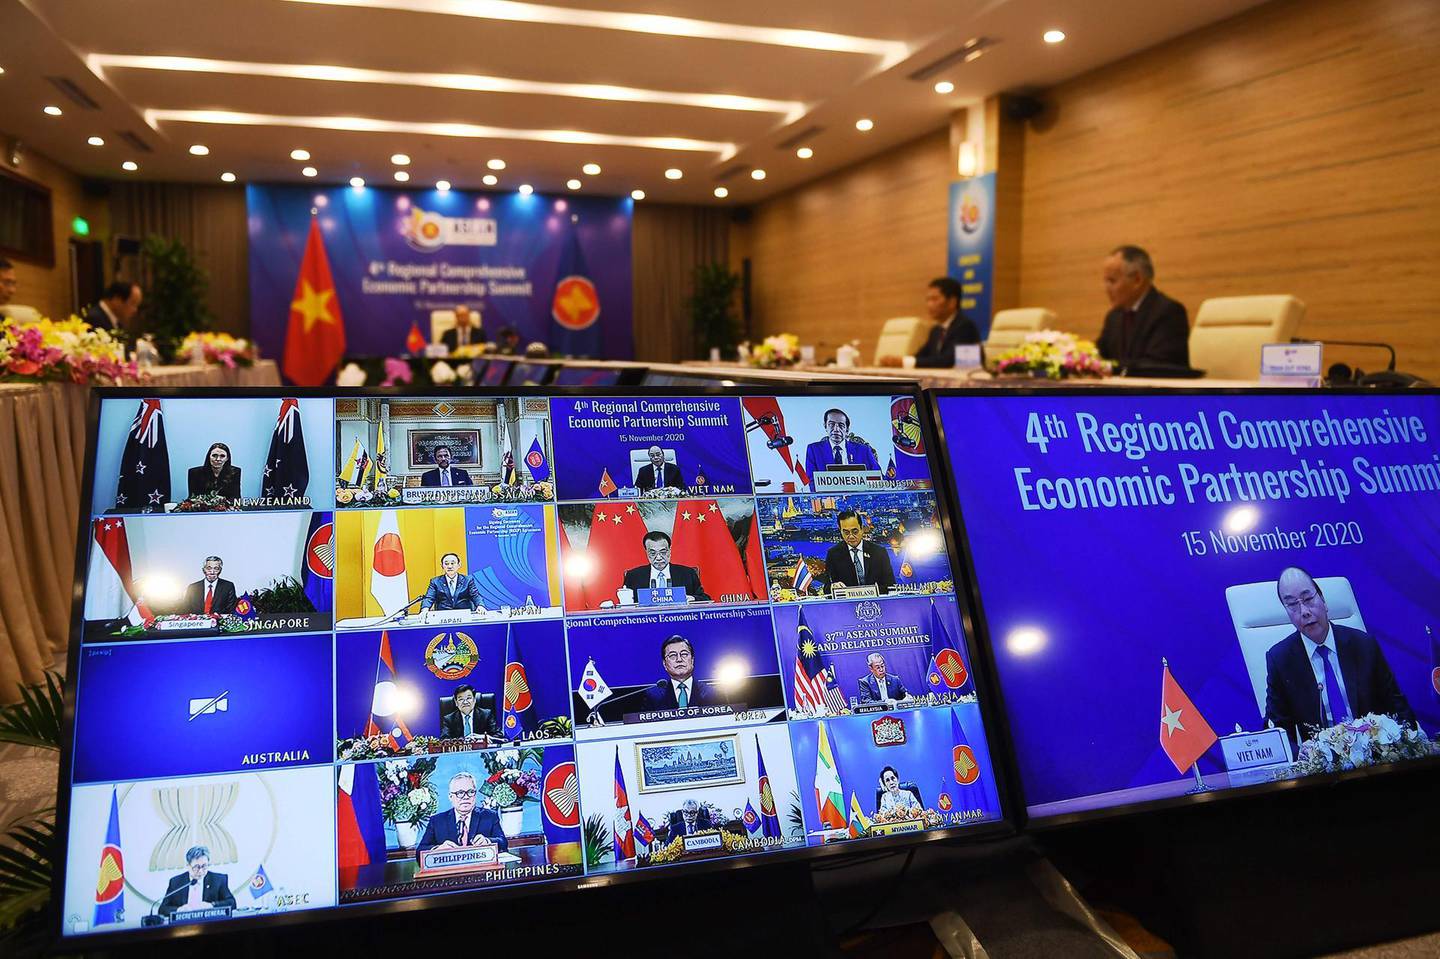 Vietnam's Prime Minister Nguyen Xuan Phuc is pictured on the screen (R) as he addresses his counterparts during the 4th Regional Comprehensive Economic Partnership (RCEP) Summit at the Association of Southeast Asian Nations (ASEAN) summit being held online in Hanoi on November 15, 2020. / AFP / Nhac NGUYEN
